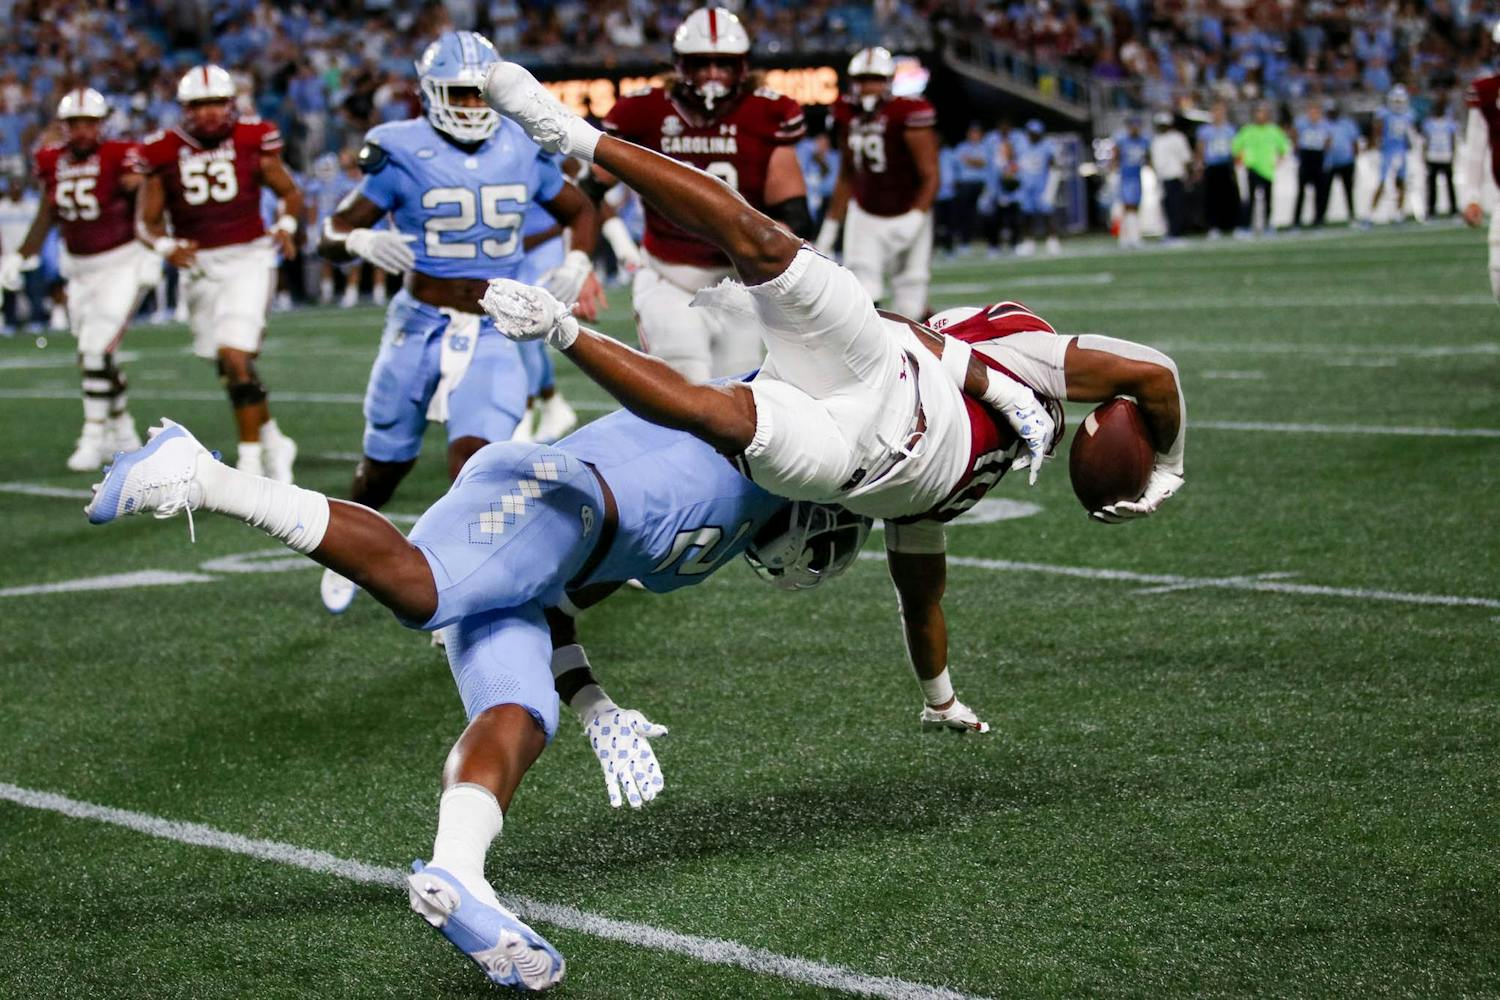 The University of North Carolina and the University of South Carolina met at the Bank of America Stadium in Charlotte, North Carolina, for the 2023 鶹С򽴫ý's opening game. The Tar Heels defeated the Gamecocks 31-17 and now lead the series between the two teams 36-20-4. Redshirt senior quarterback Spencer Rattler was 30-39 with 353 yards in the 鶹С򽴫ý opener.